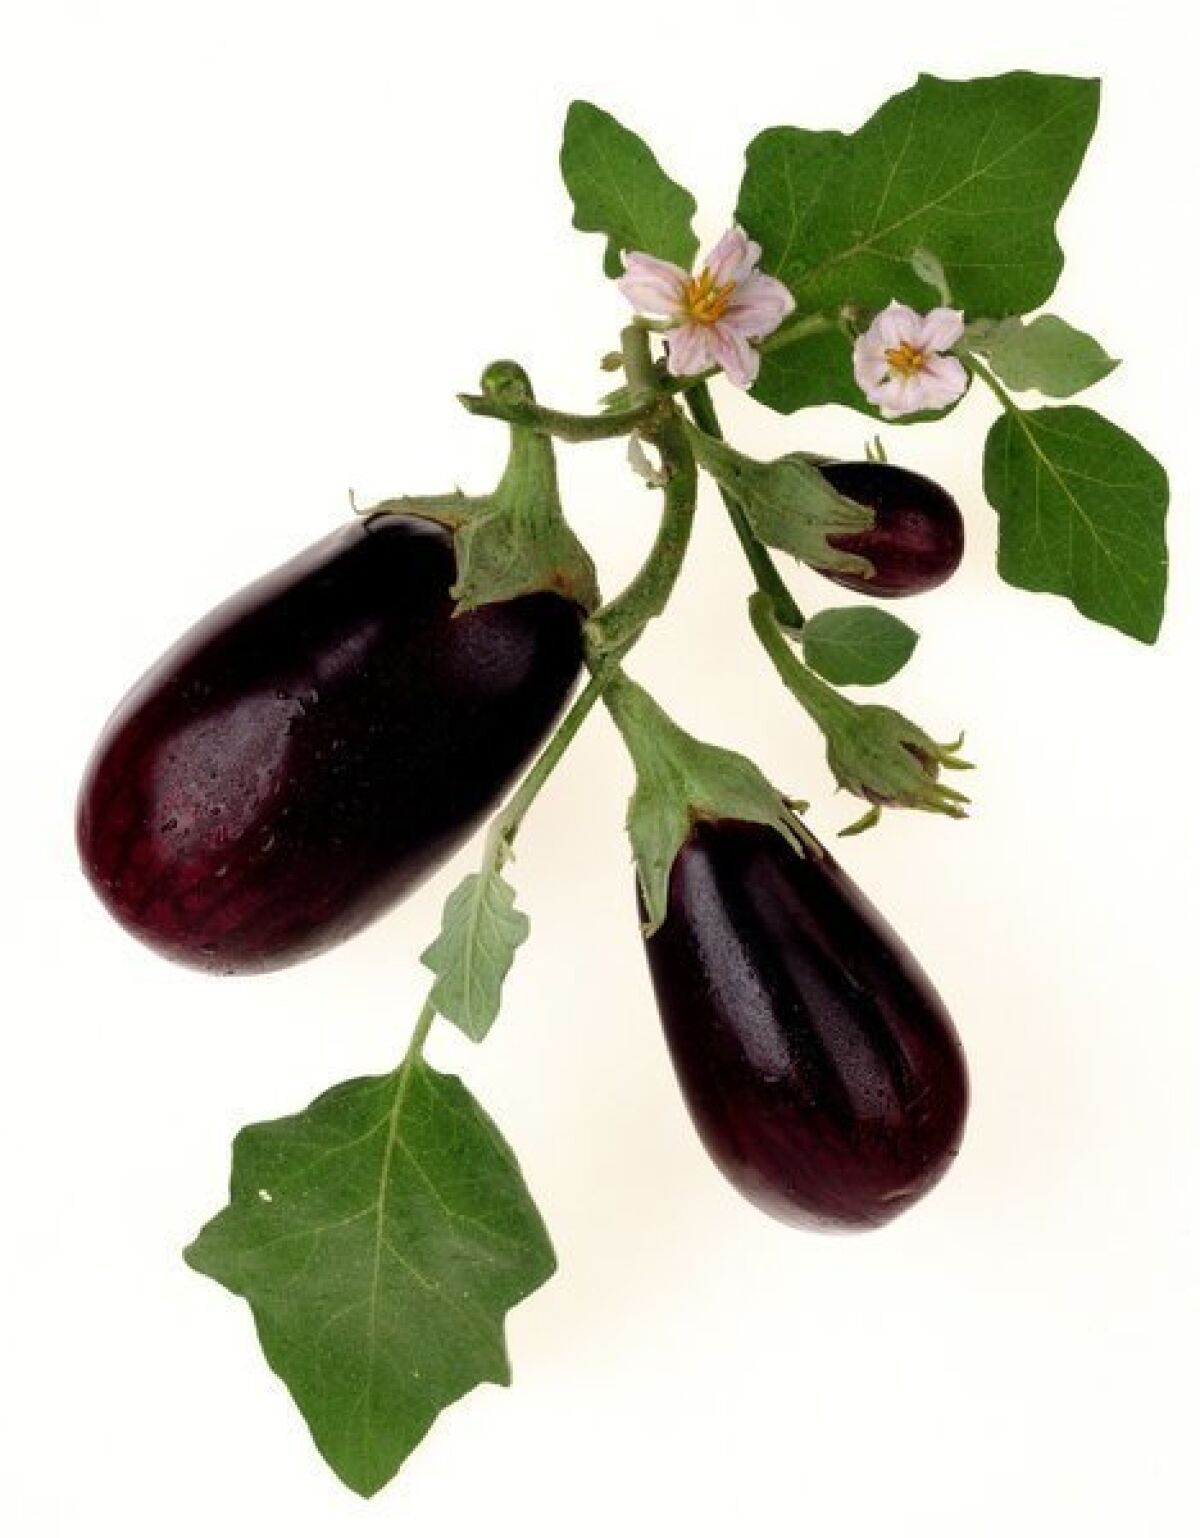 With proper pruning and feeding, eggplant can be grown as a perennial, though gardeners should be prepared for harvests to decline eventually.